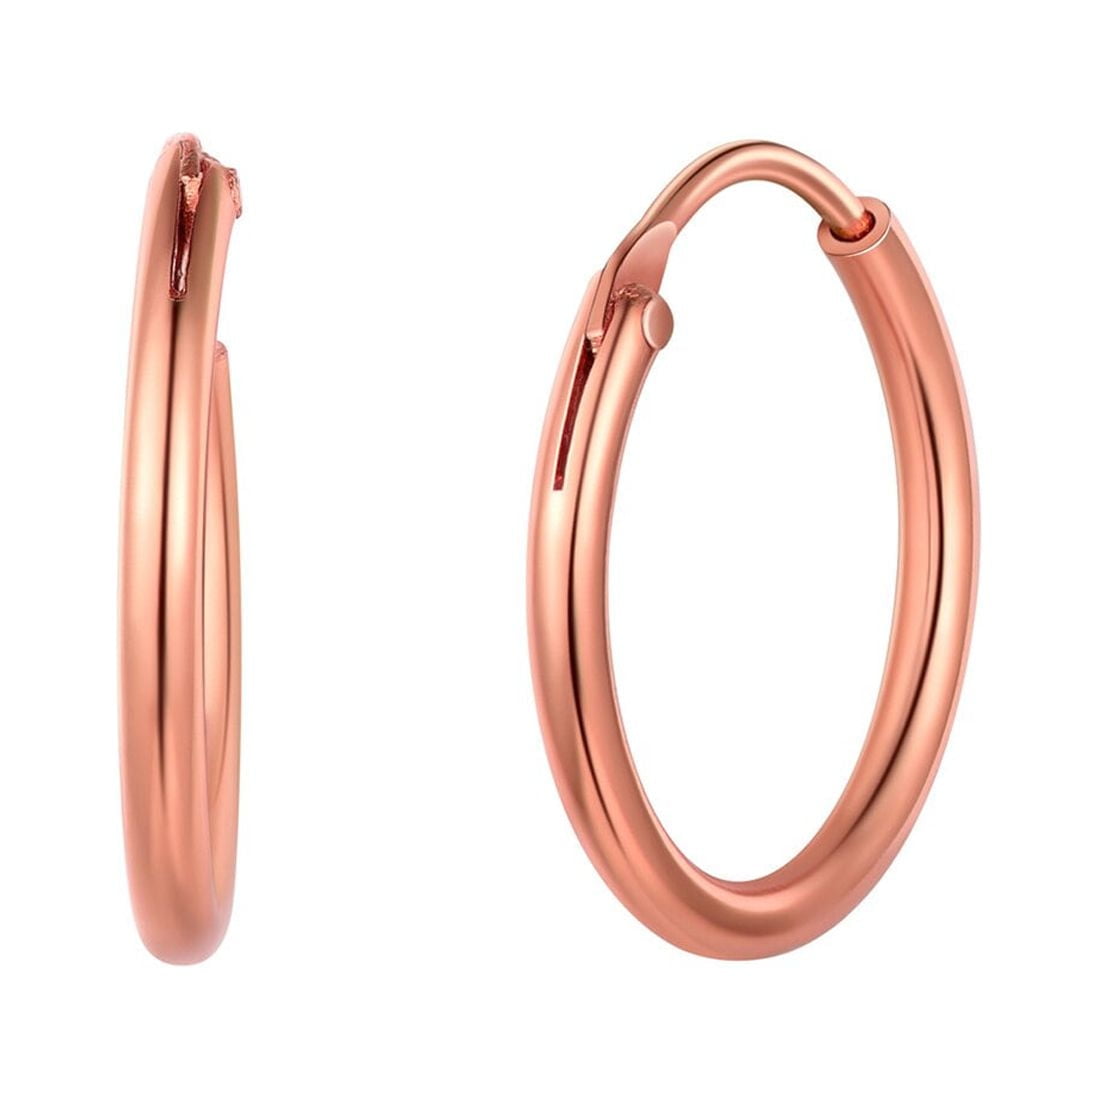 14K Gold Plated Solid Gold Hoop In Carti Earrings For Women Hypoallergenic  Designer Jewelry With Organizer Perfect Birthday Gift In Steel, Silver,  Gold, And Rose From Designerjewlery, $8.51